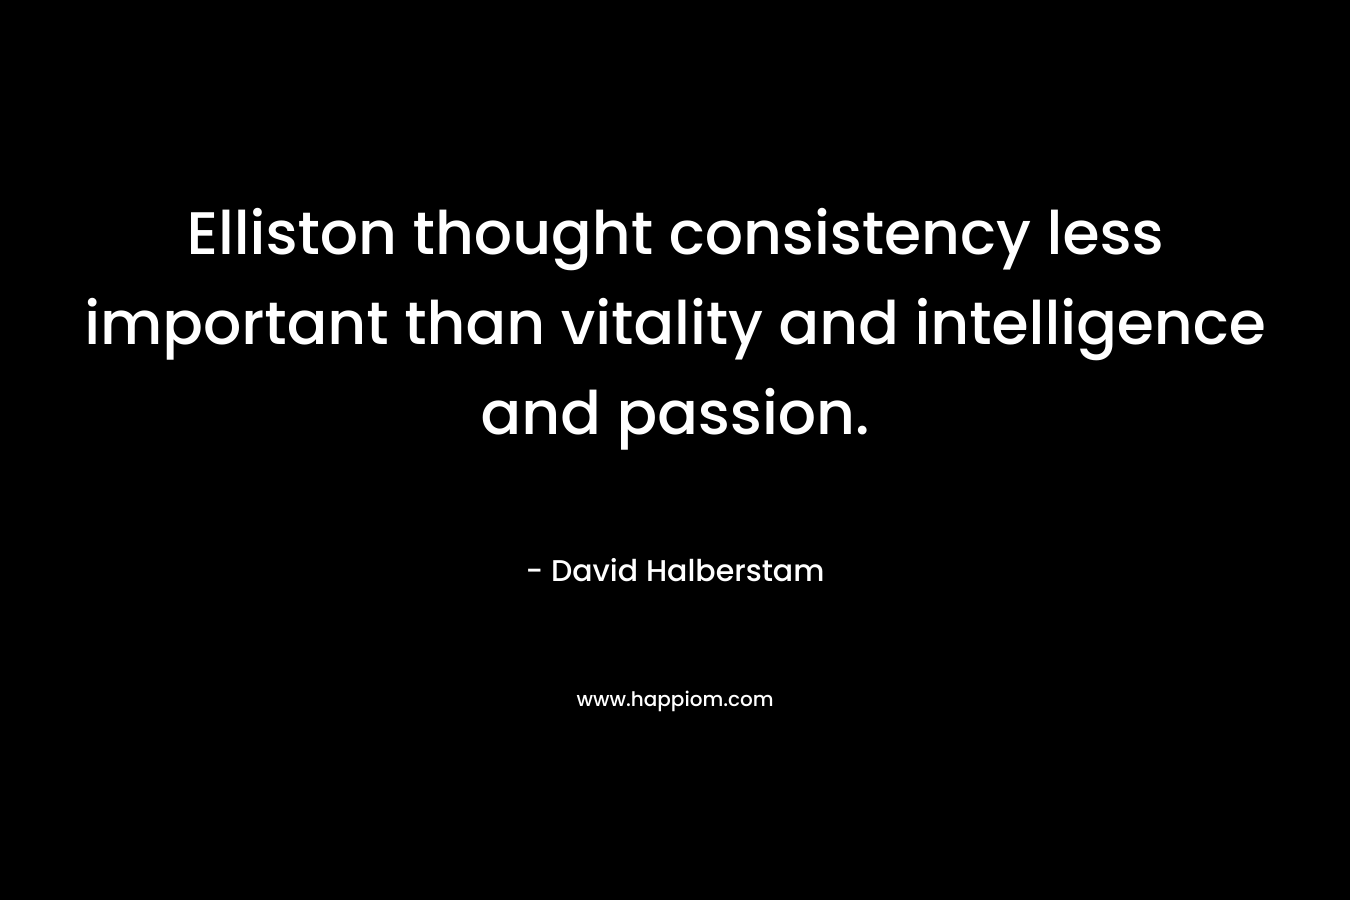 Elliston thought consistency less important than vitality and intelligence and passion. – David Halberstam